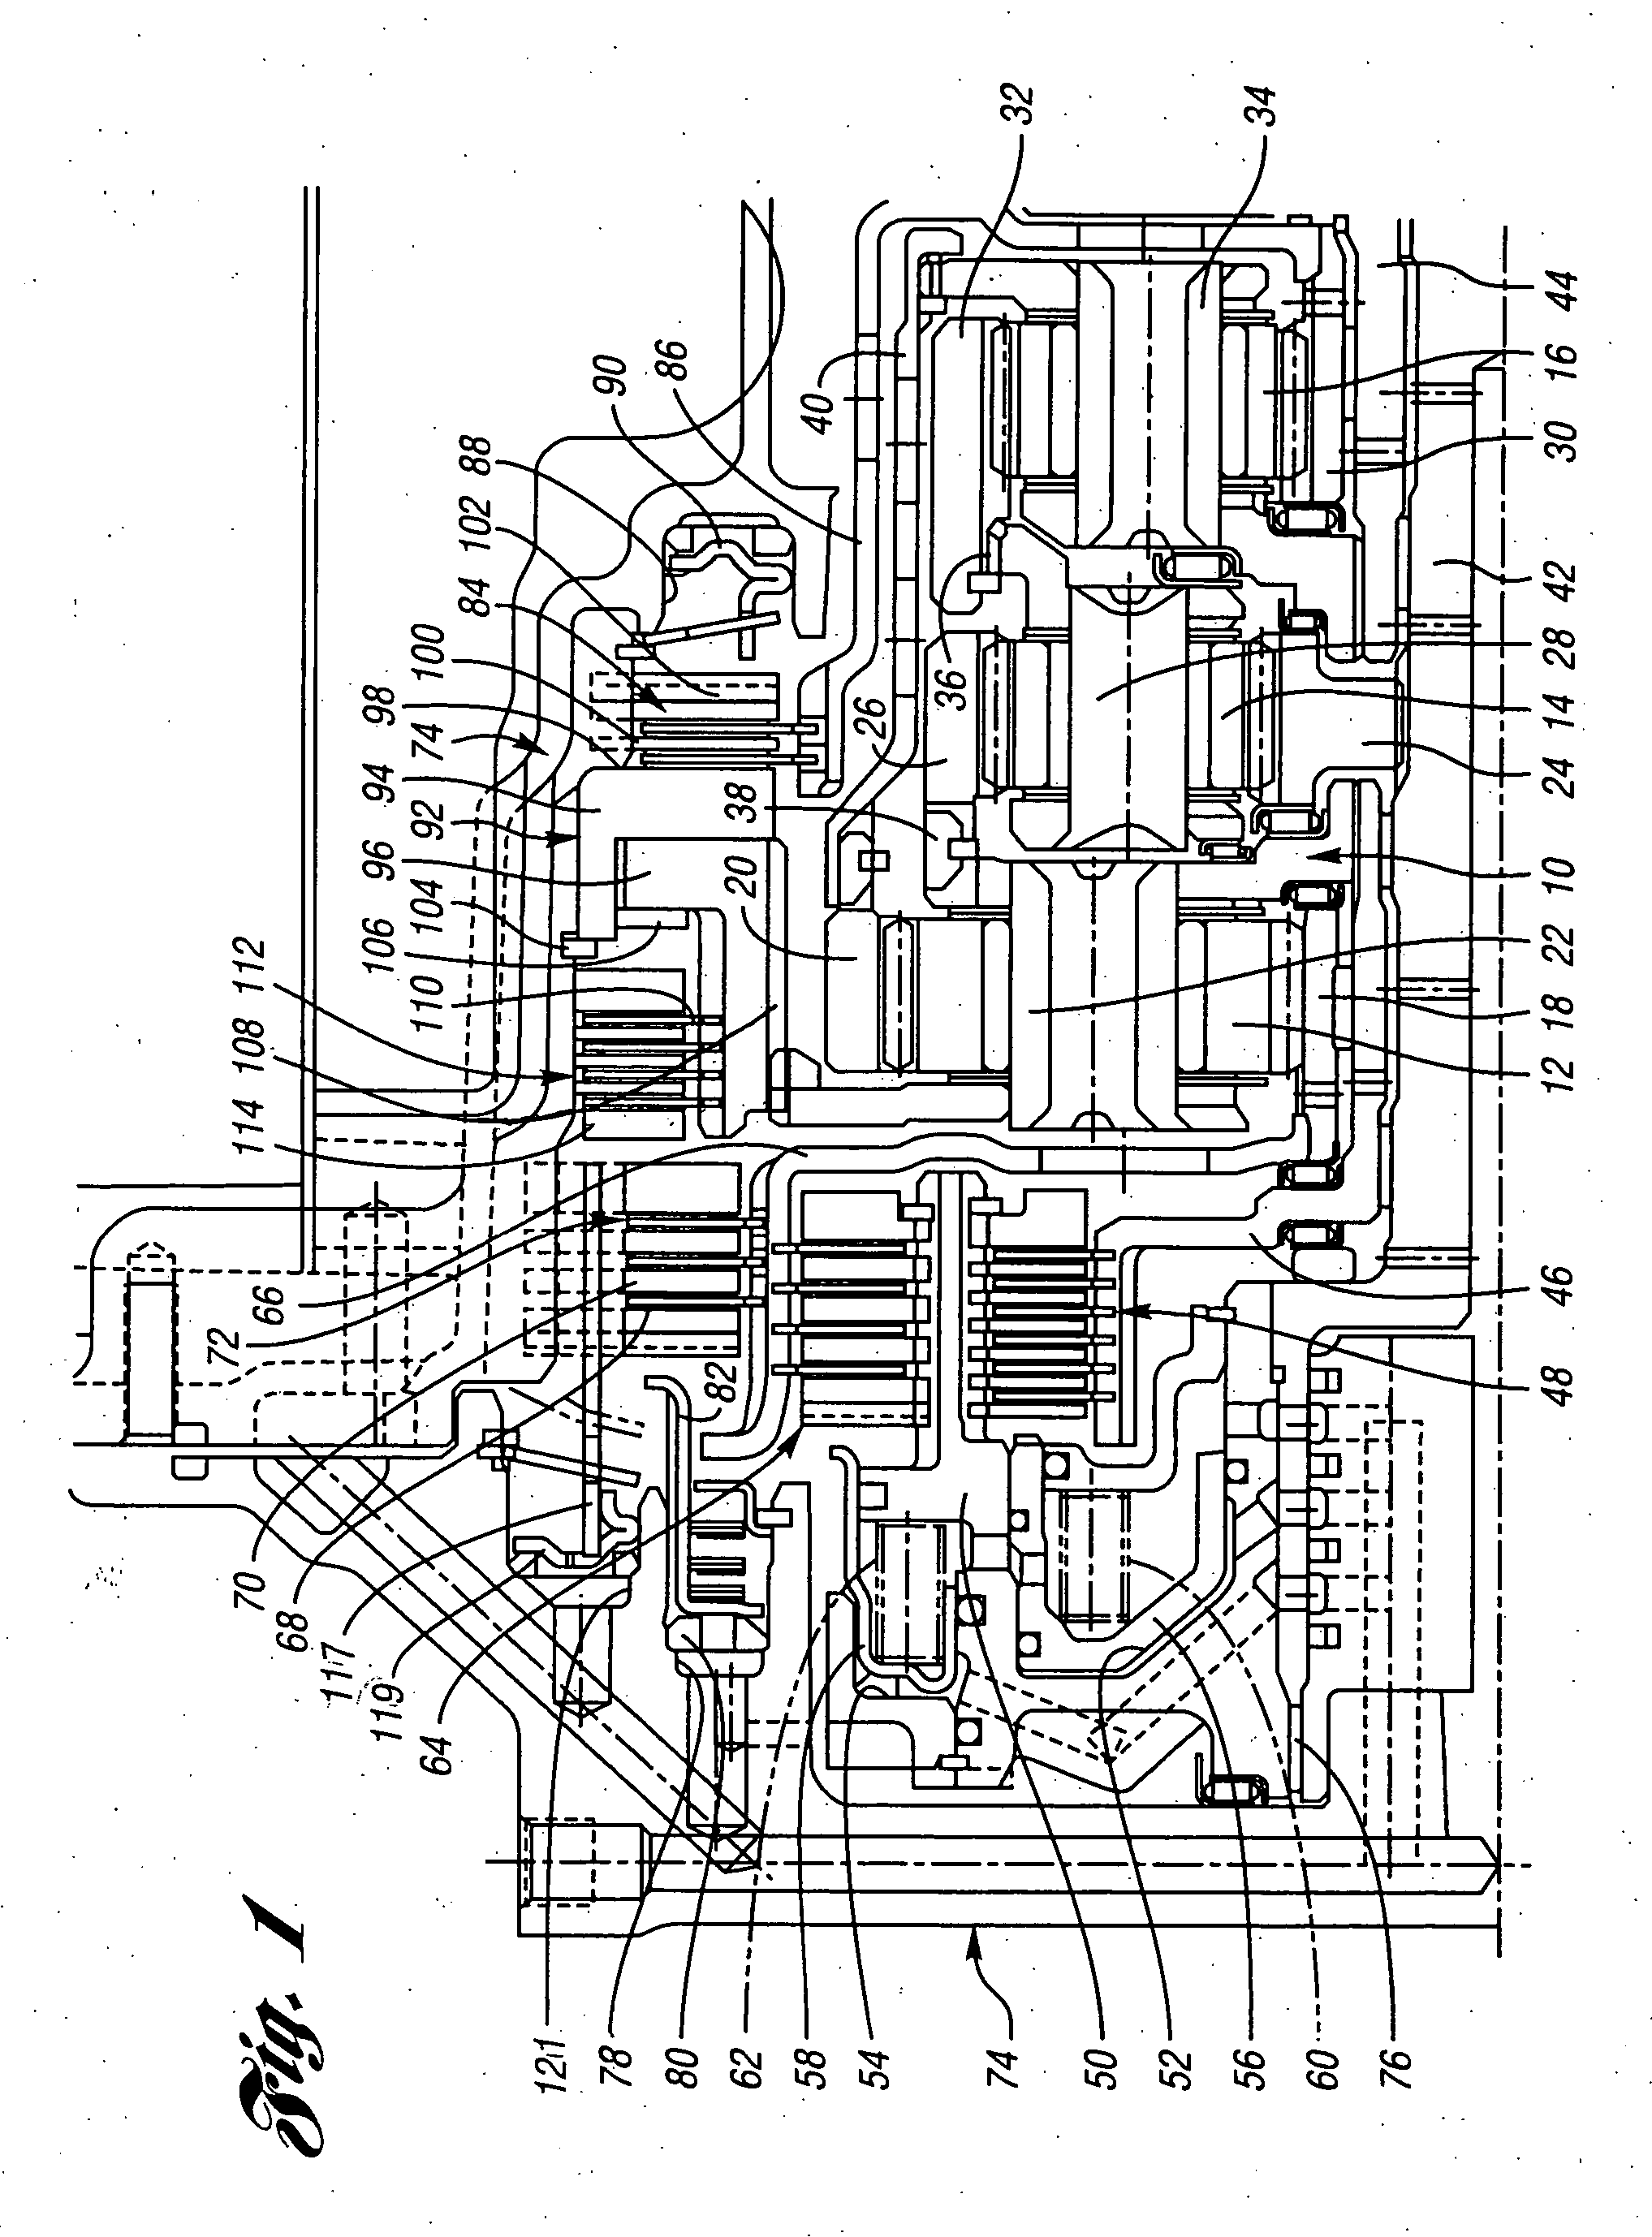 Planar coupling assembly for an automatic transmission